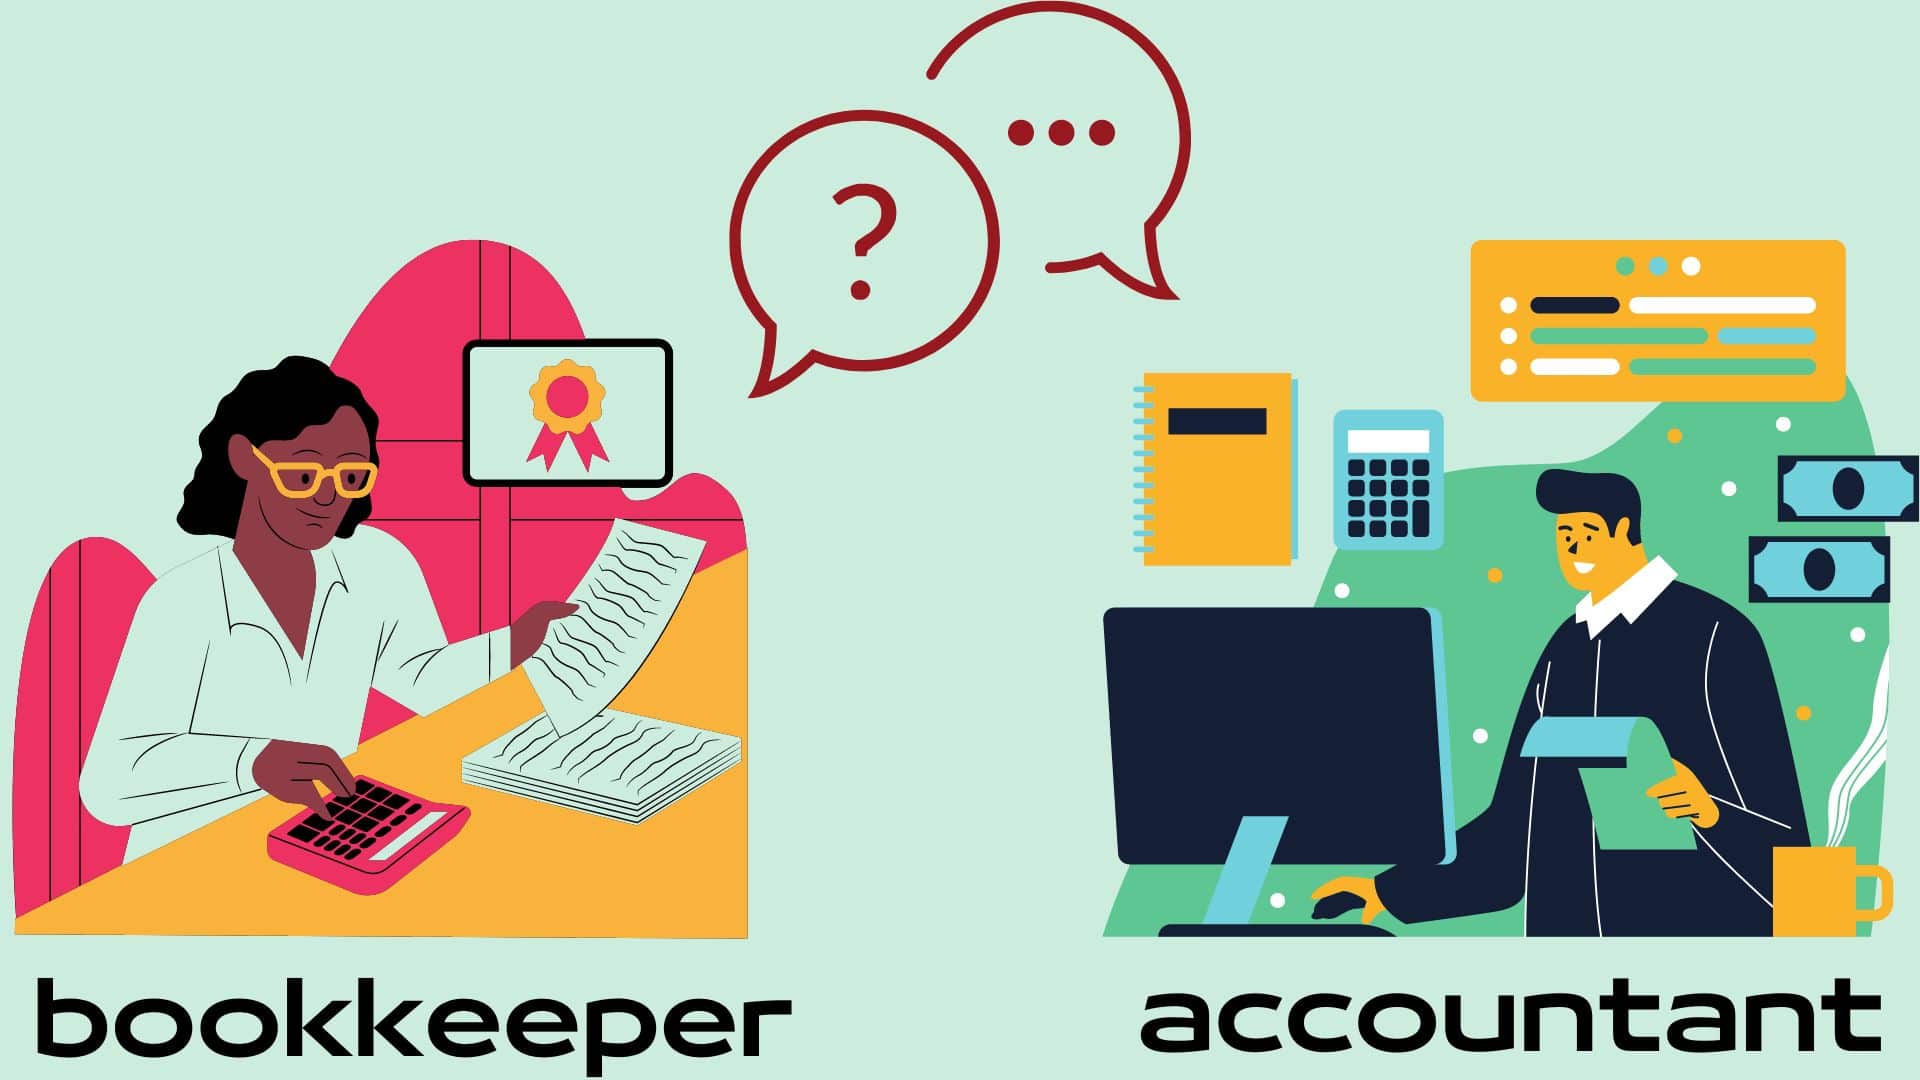 The difference between a bookkeeper and accountant